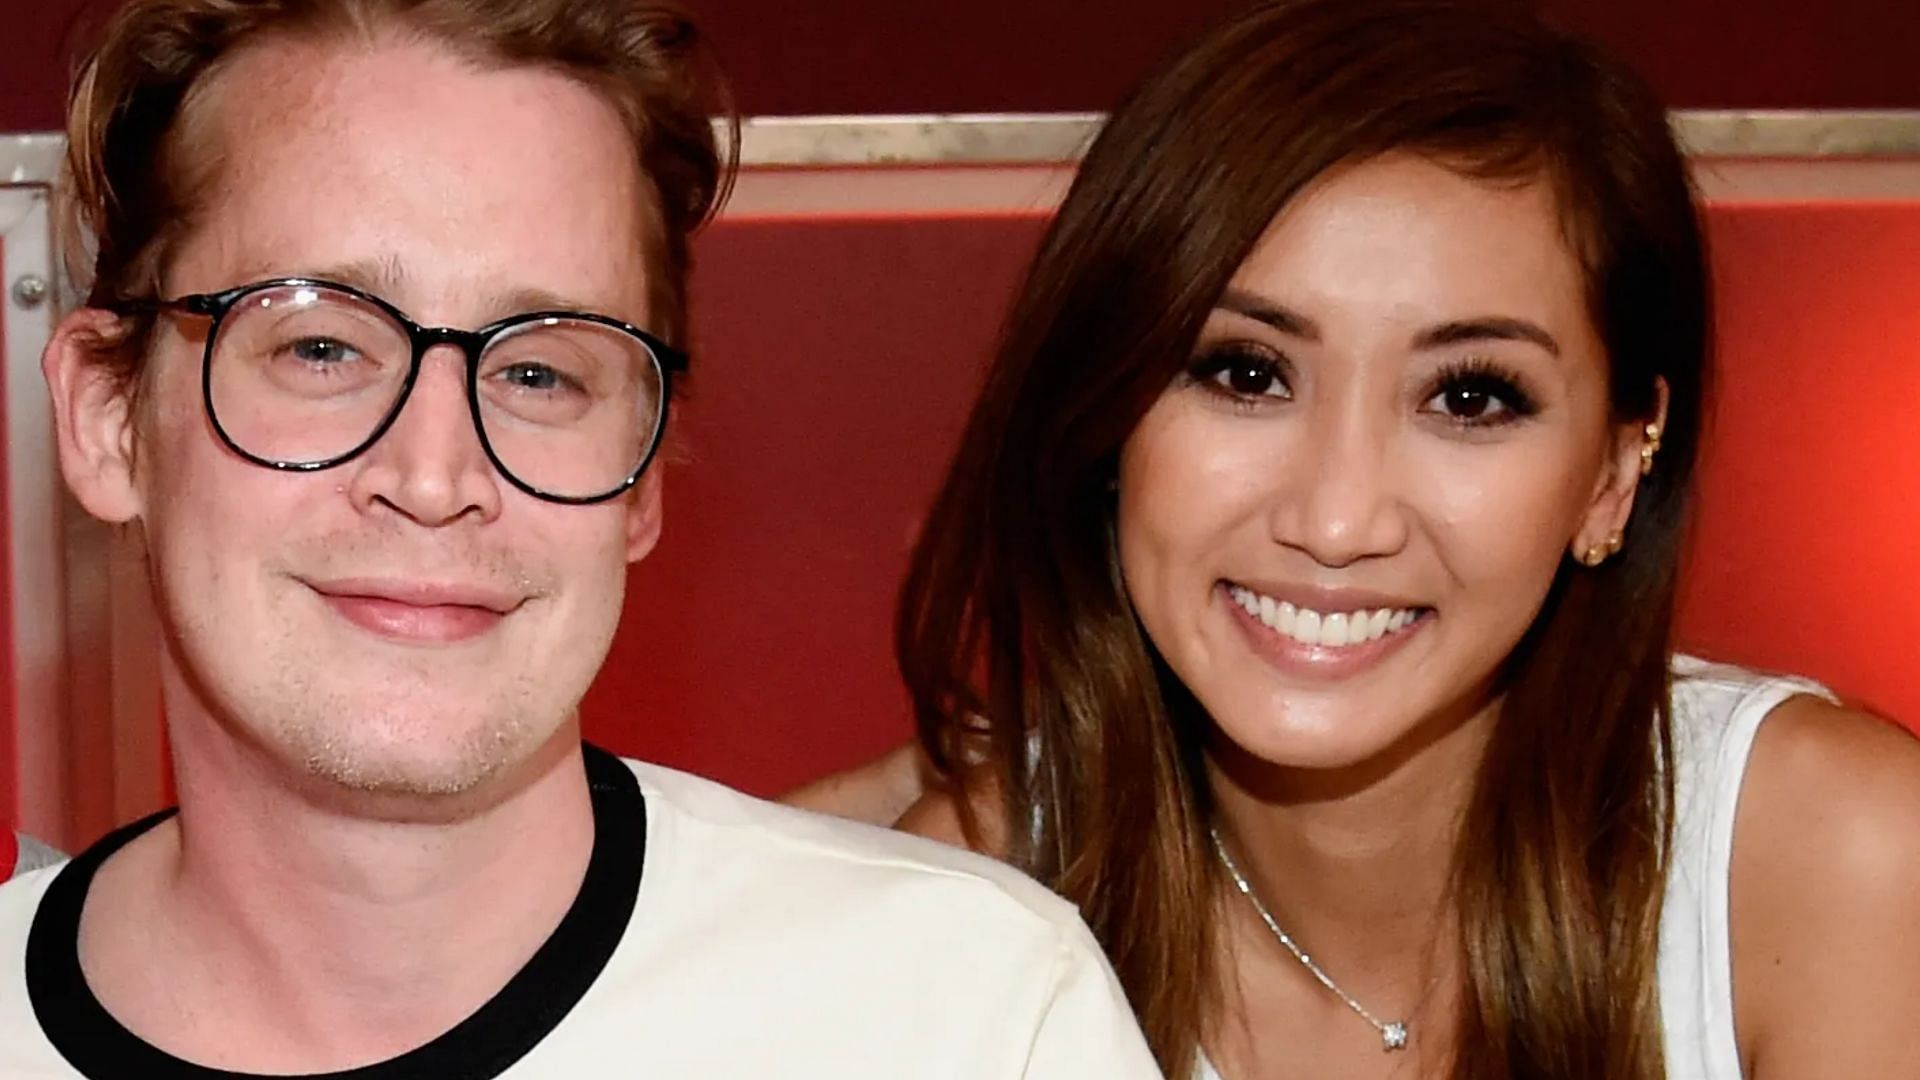 Macaulay Culkin and Brenda Song. (Photo via Kevin Mazur/Getty Images)